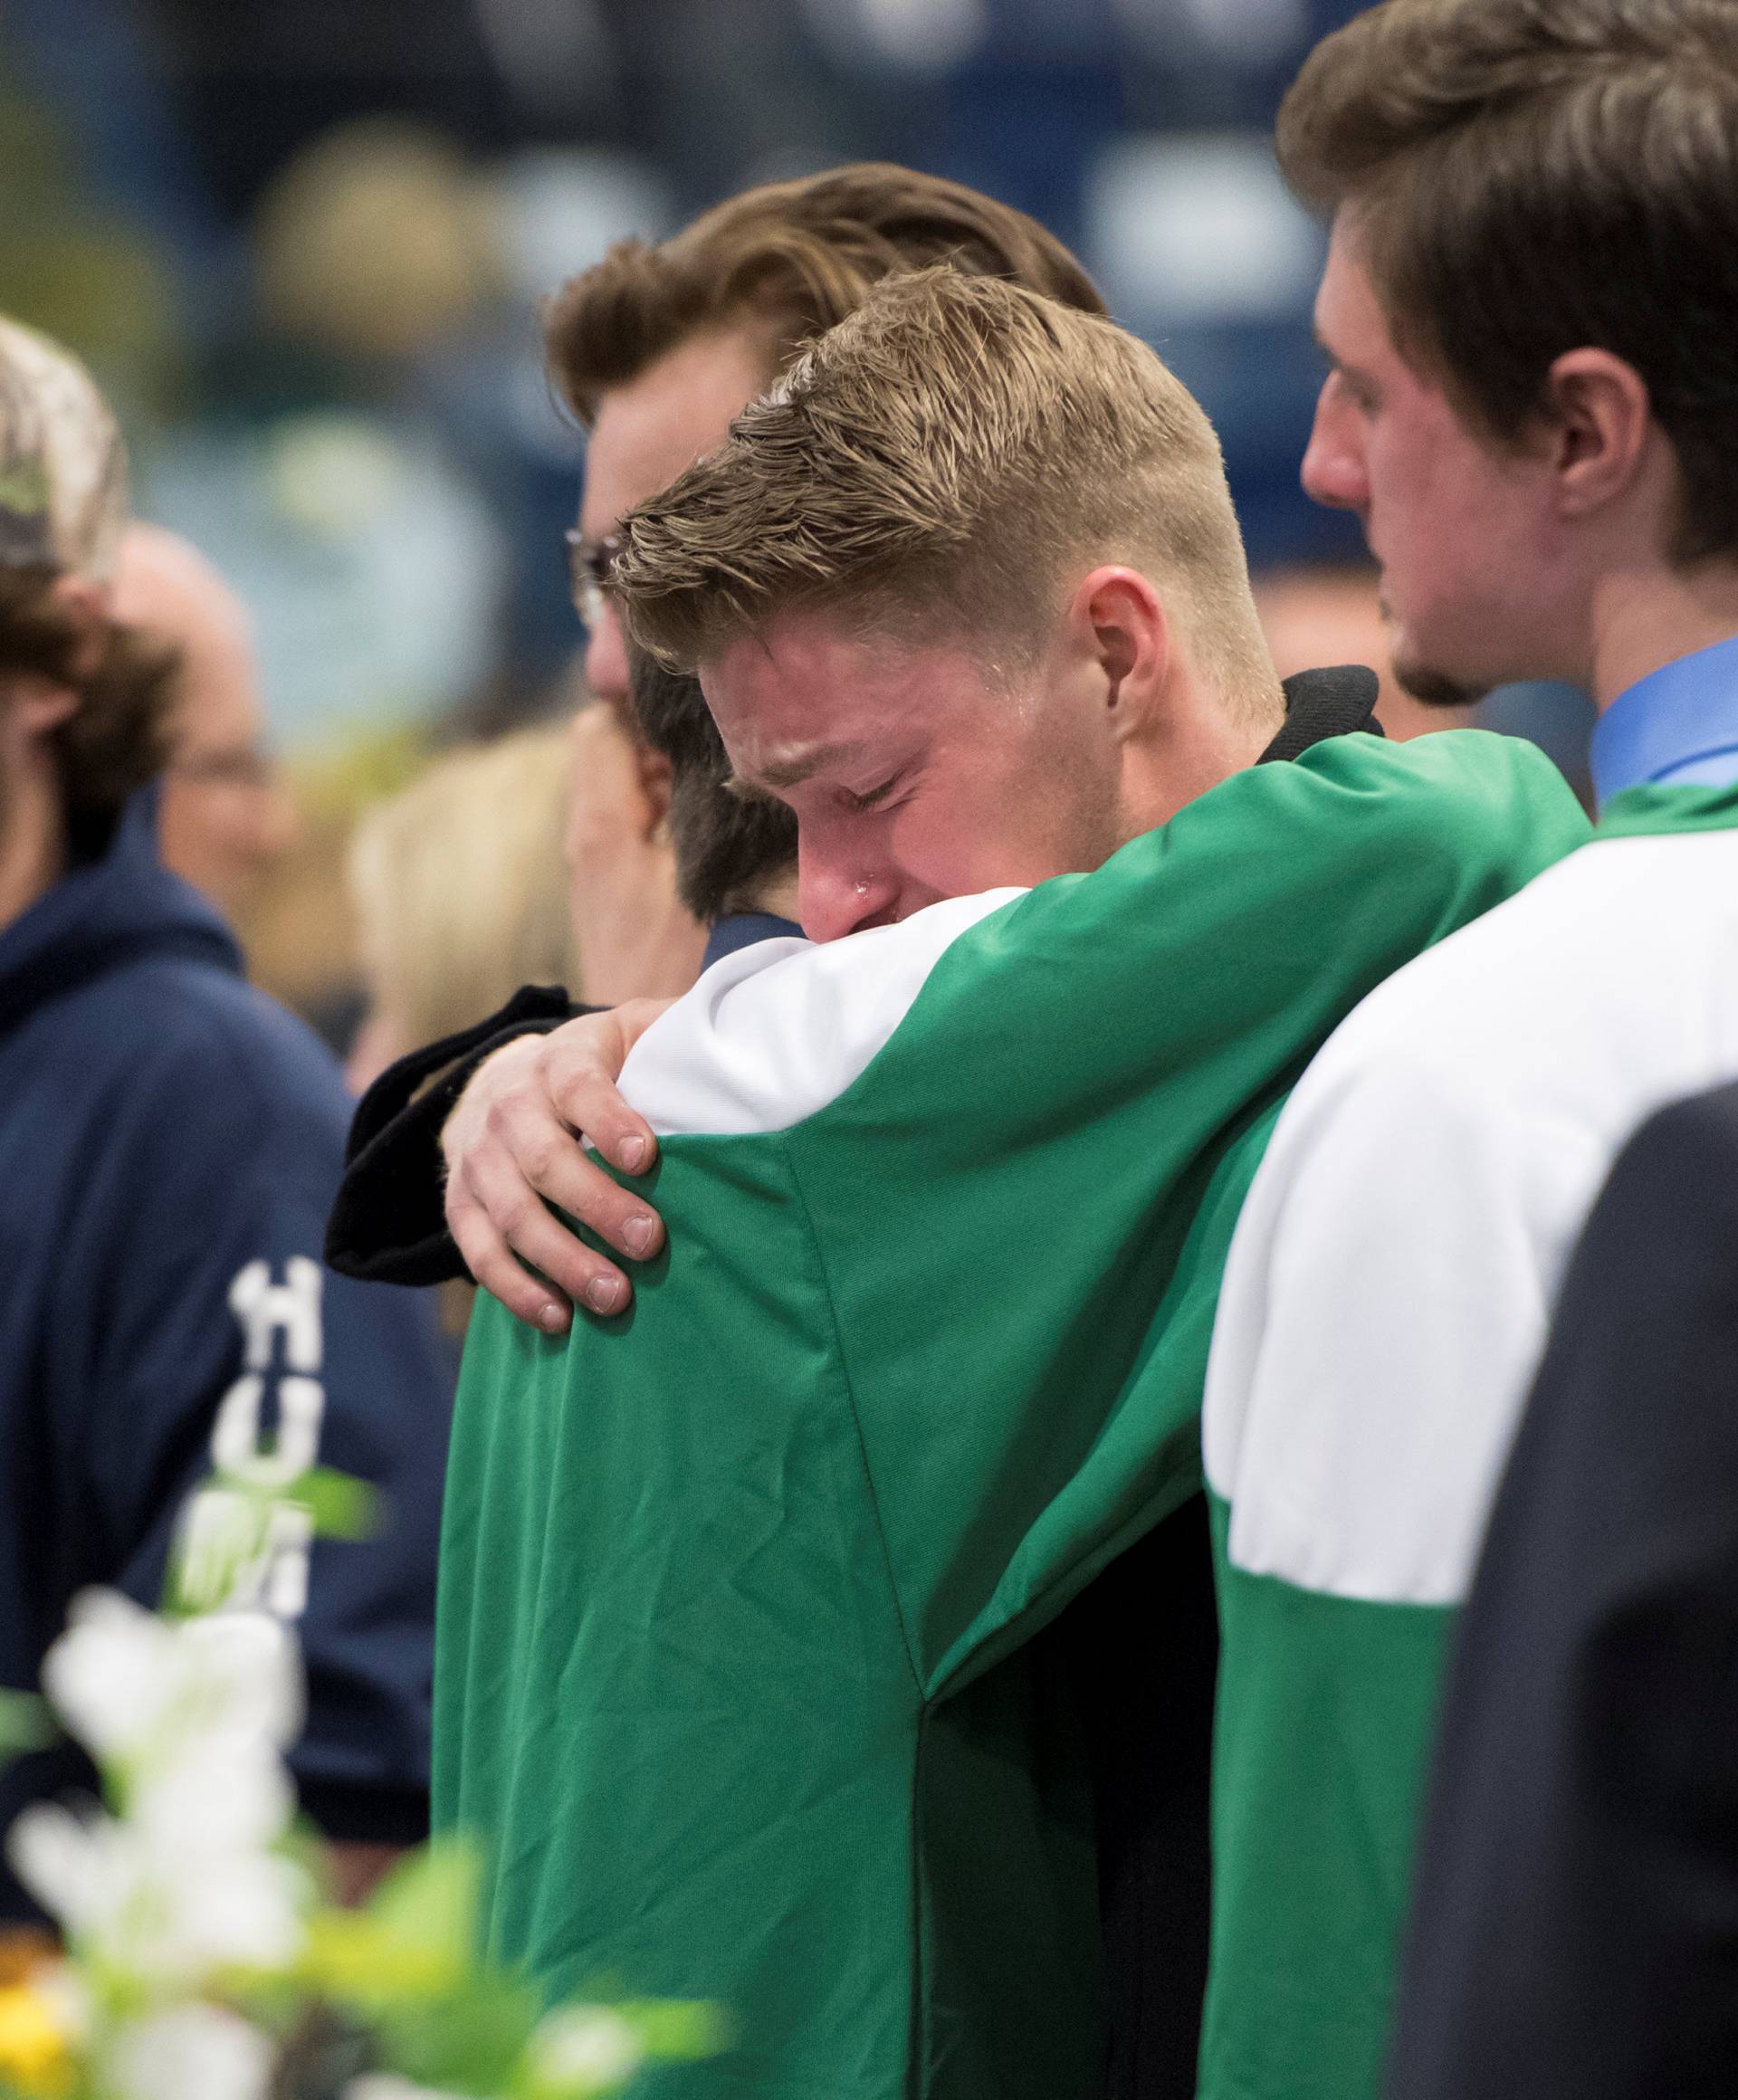 Mourners comfort each other during a vigil at the Elgar Petersen Arena, home of the Humboldt Broncos, to honour the victims of a fatal bus accident in Humboldt